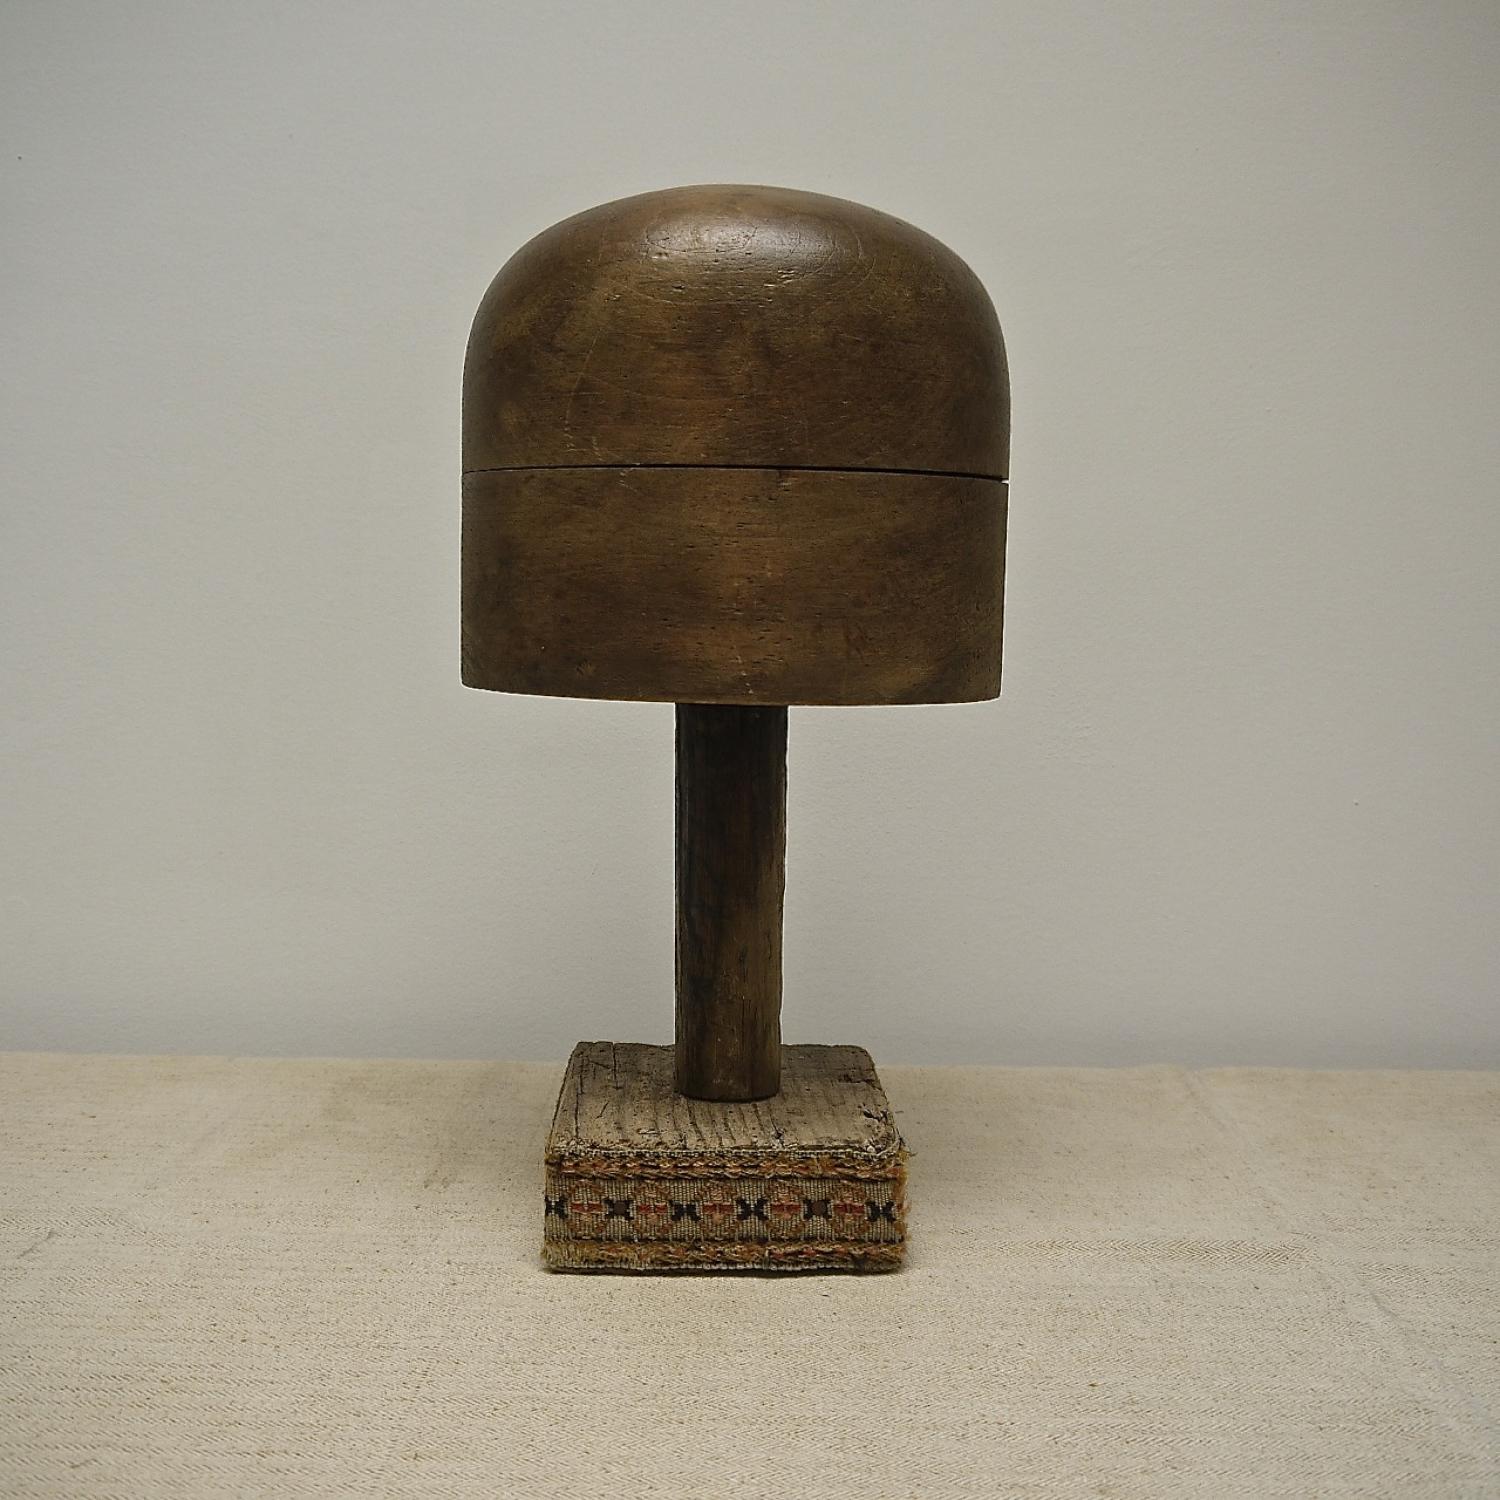 19th century French hat block on stand